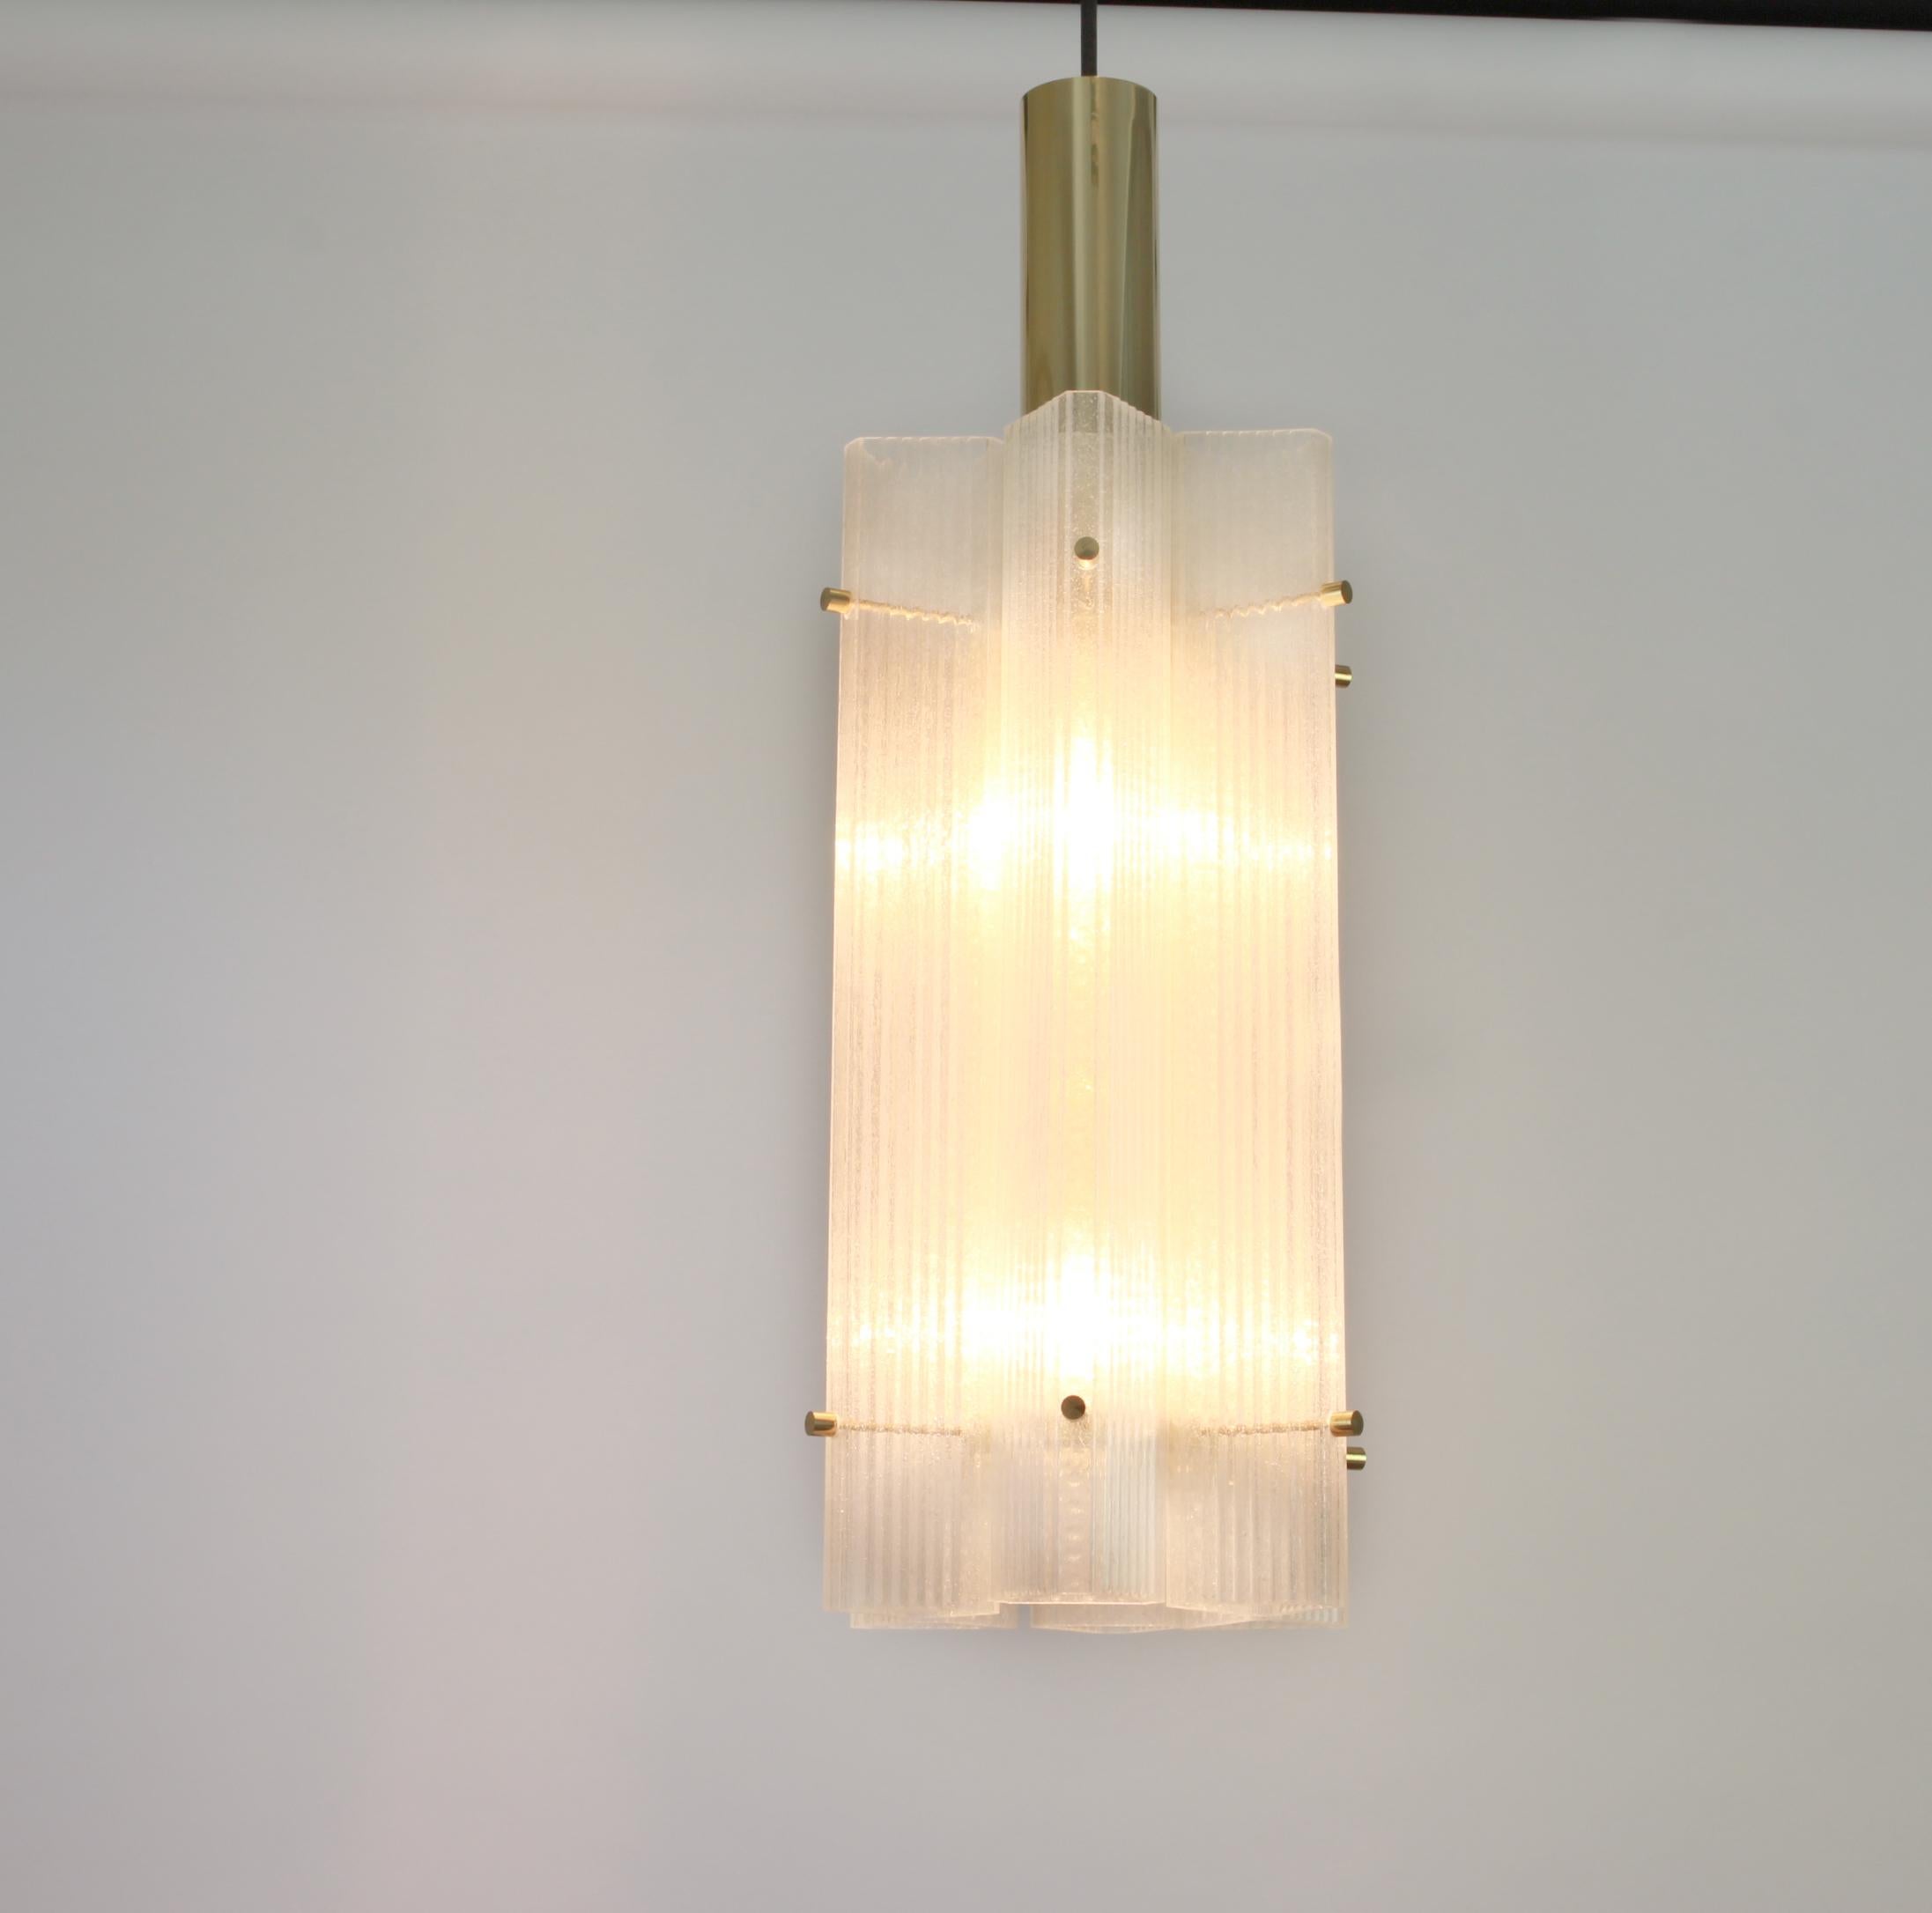 1 of 3 large Murano ice glass pendants by Limburg, Germany, 1970s.

6 glass elements on a brass frame with 2 x E27 standard bulbs.
Wonderful design.

Measures: Diameter 22 cm / 8.66 inch
Height (total): 100 cm // 39.37 inch
The height can be